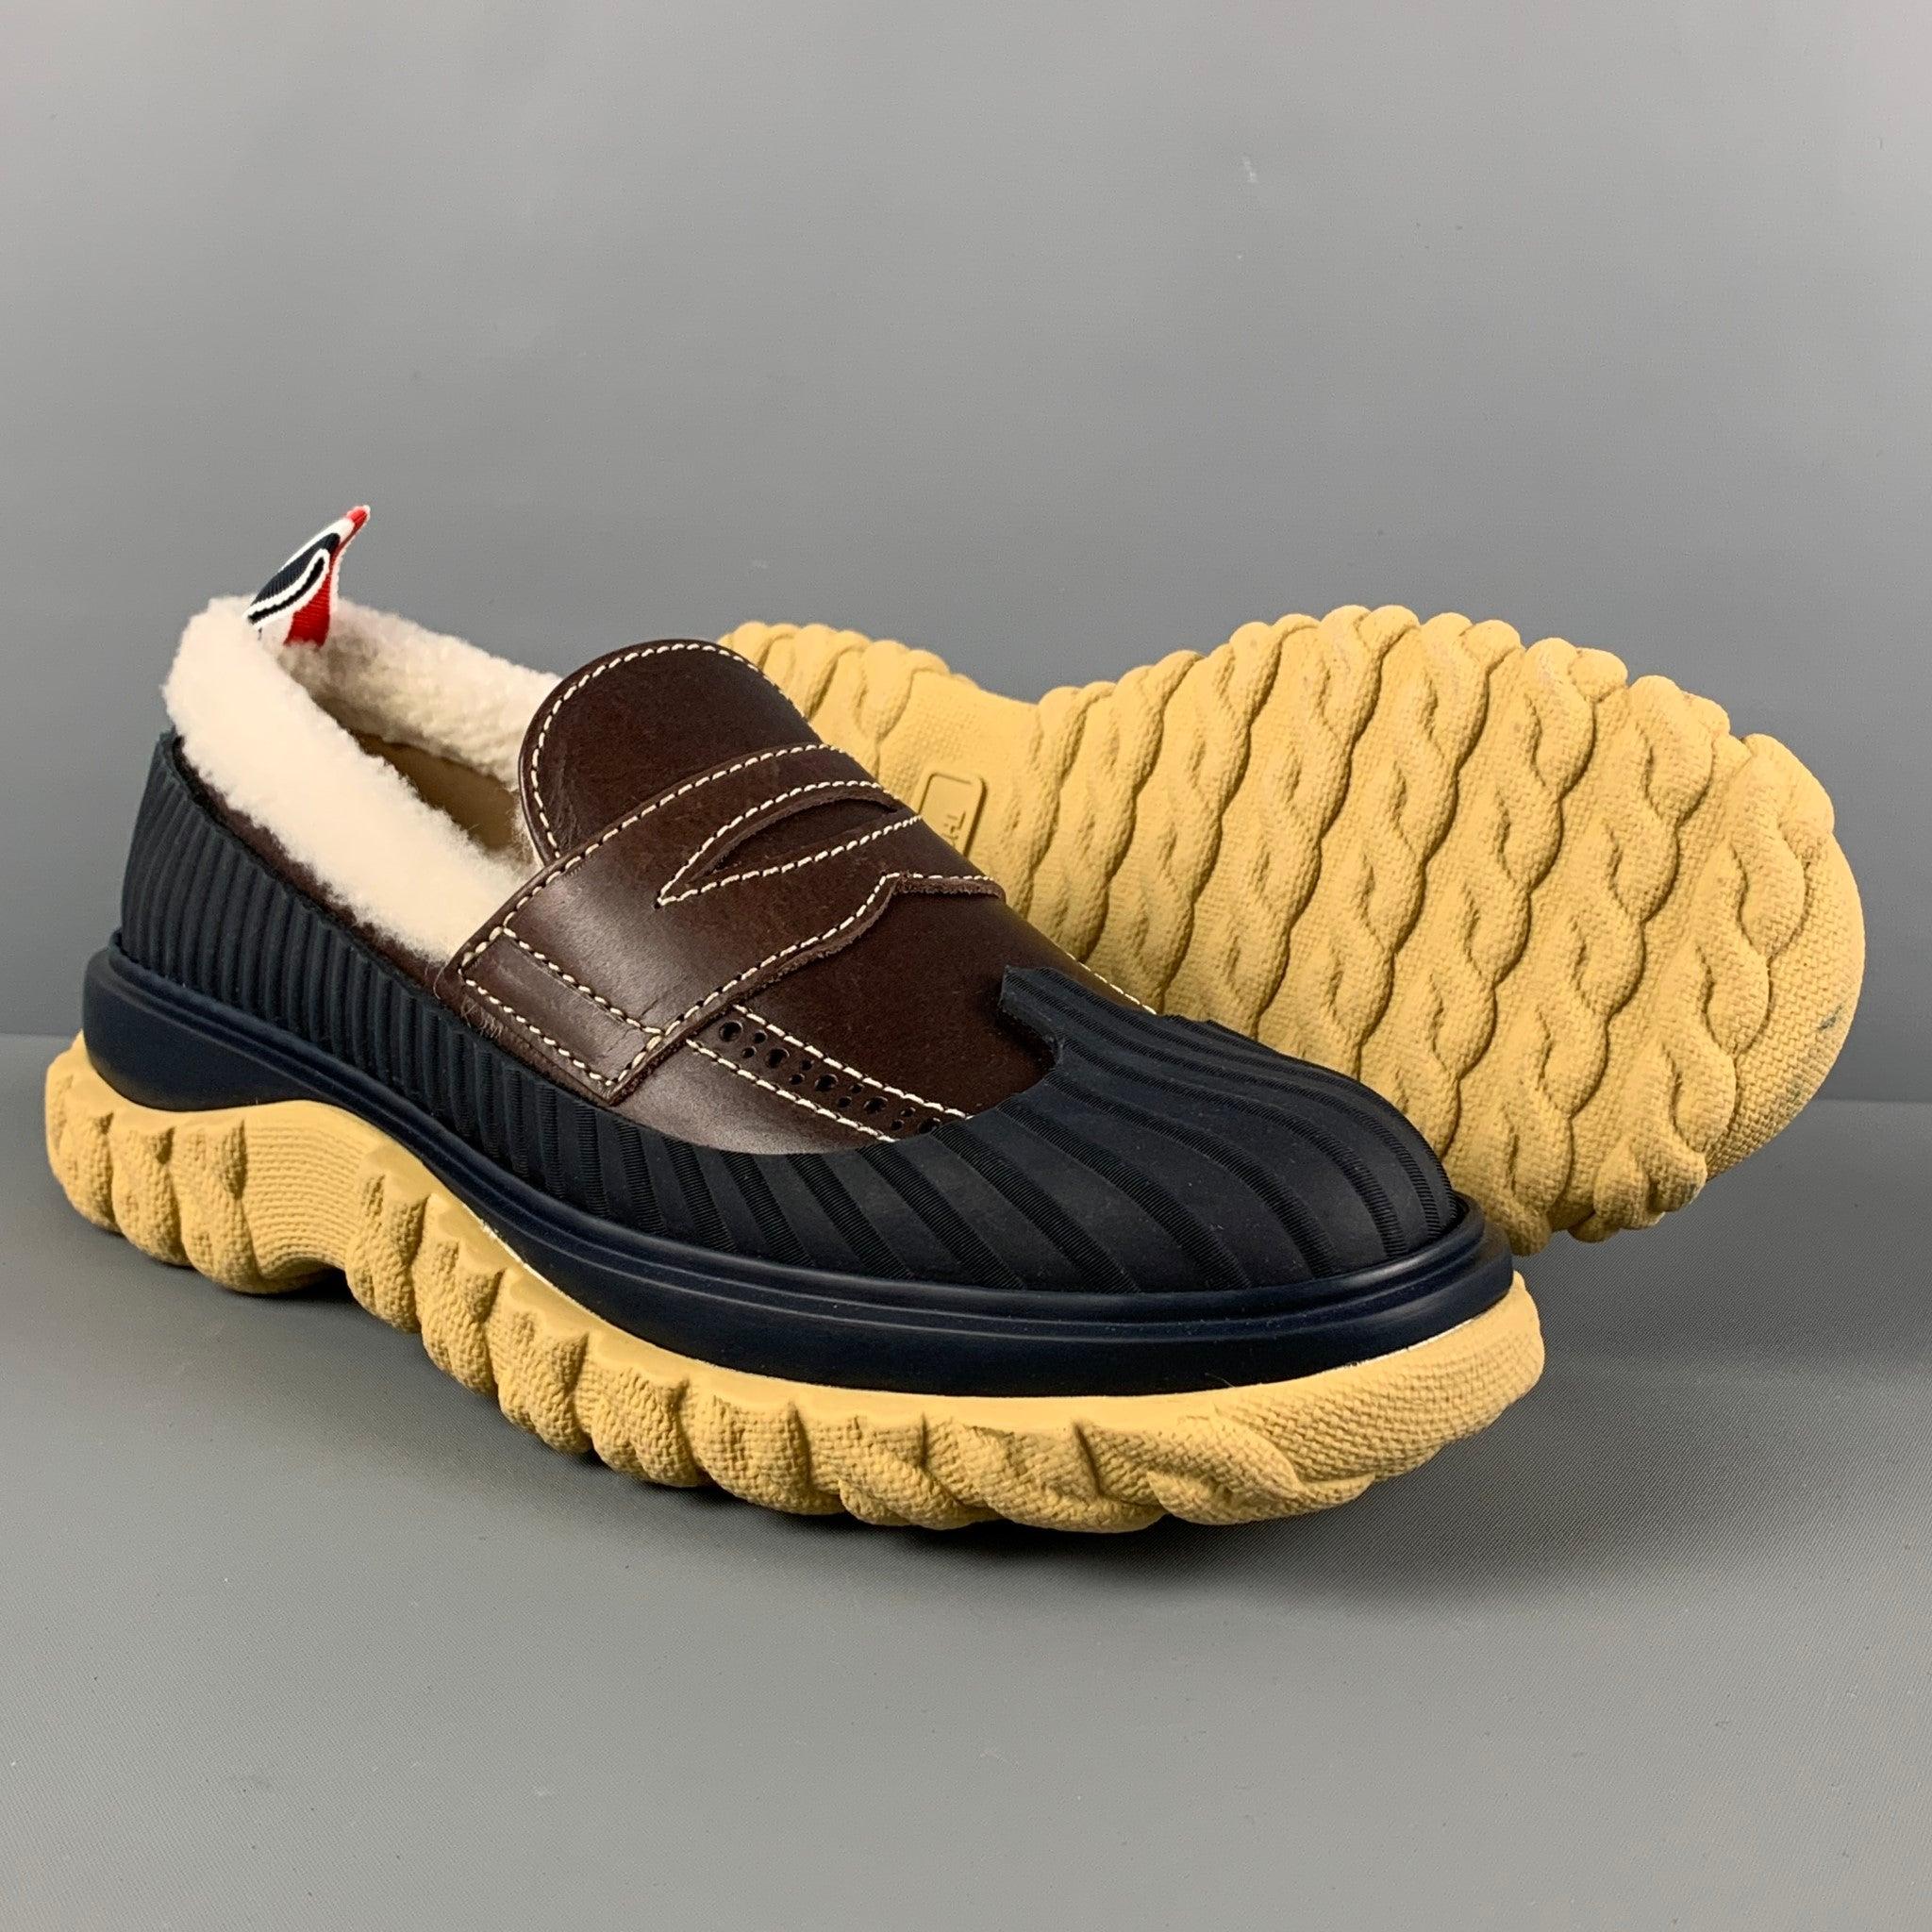 THOM BROWNE Size 7.5 Navy Cream Brown Leather Shearling Loafer Duck Shoe In Good Condition For Sale In San Francisco, CA